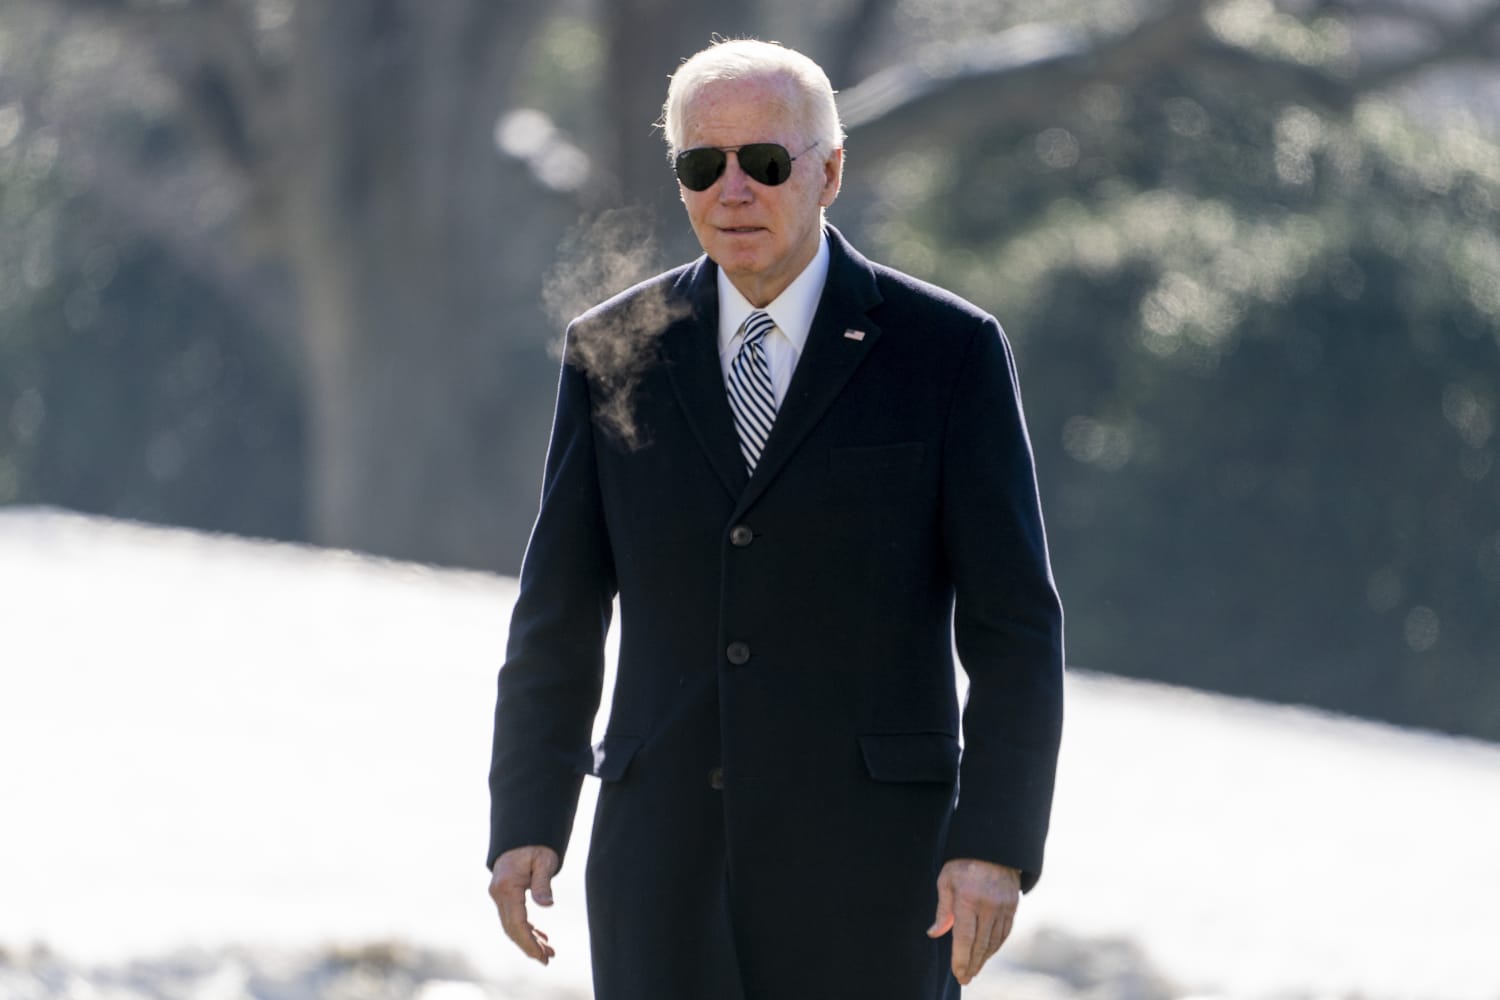 Biden undergoes annual physical examinations by voters to ensure his mental and physical health